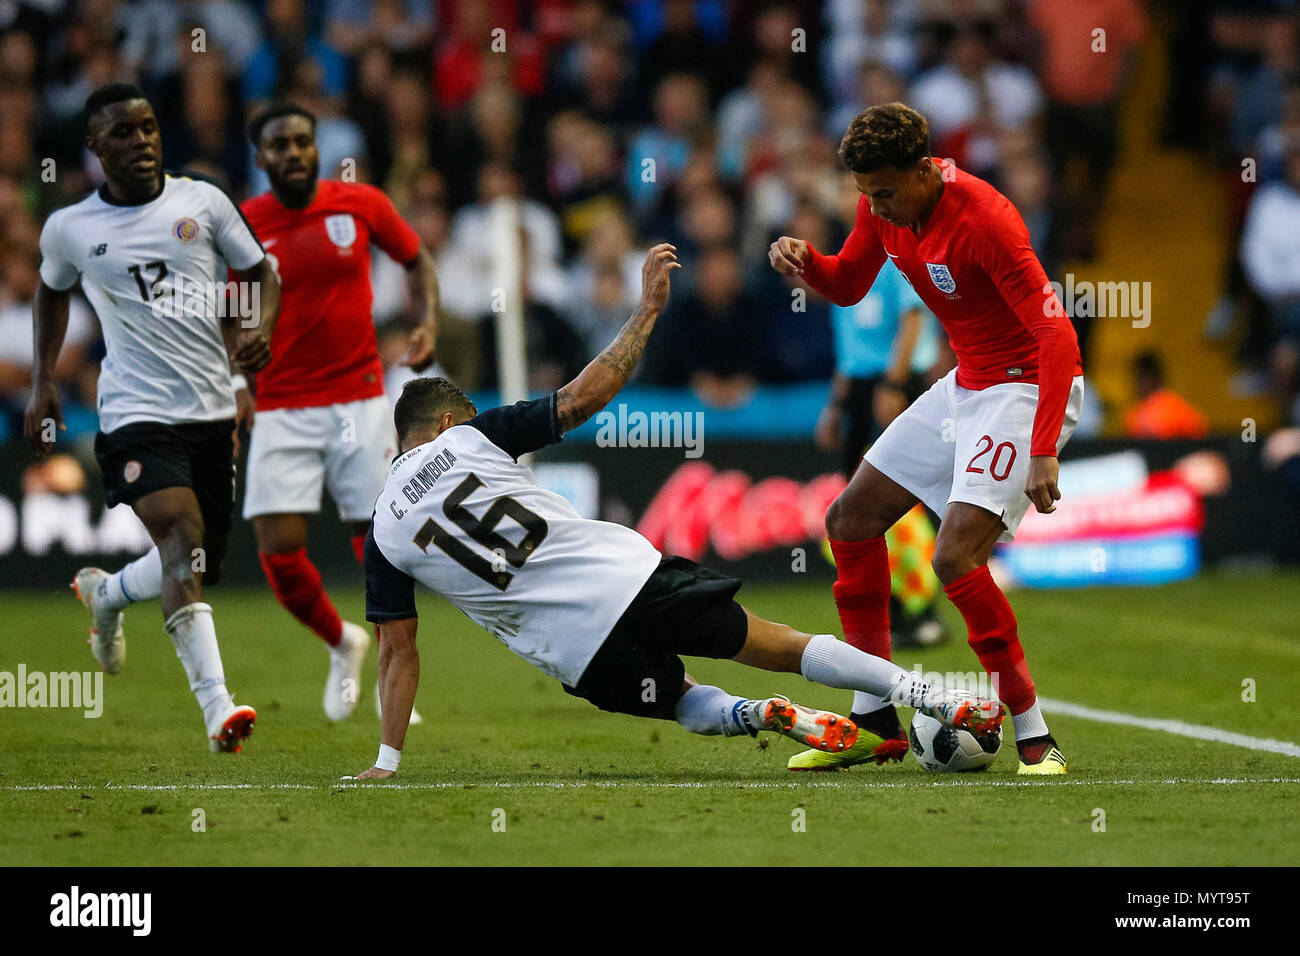 Leeds, UK. 7th Jun, 2018. Dele Alli of England is tackled by Cristian Gamboa of Costa Rica during the International Friendly match between England and Costa Rica at Elland Road on June 7th 2018 in Leeds, England. (Photo by Daniel Chesterton/phcimages) Credit: PHC Images/Alamy Live News Stock Photo